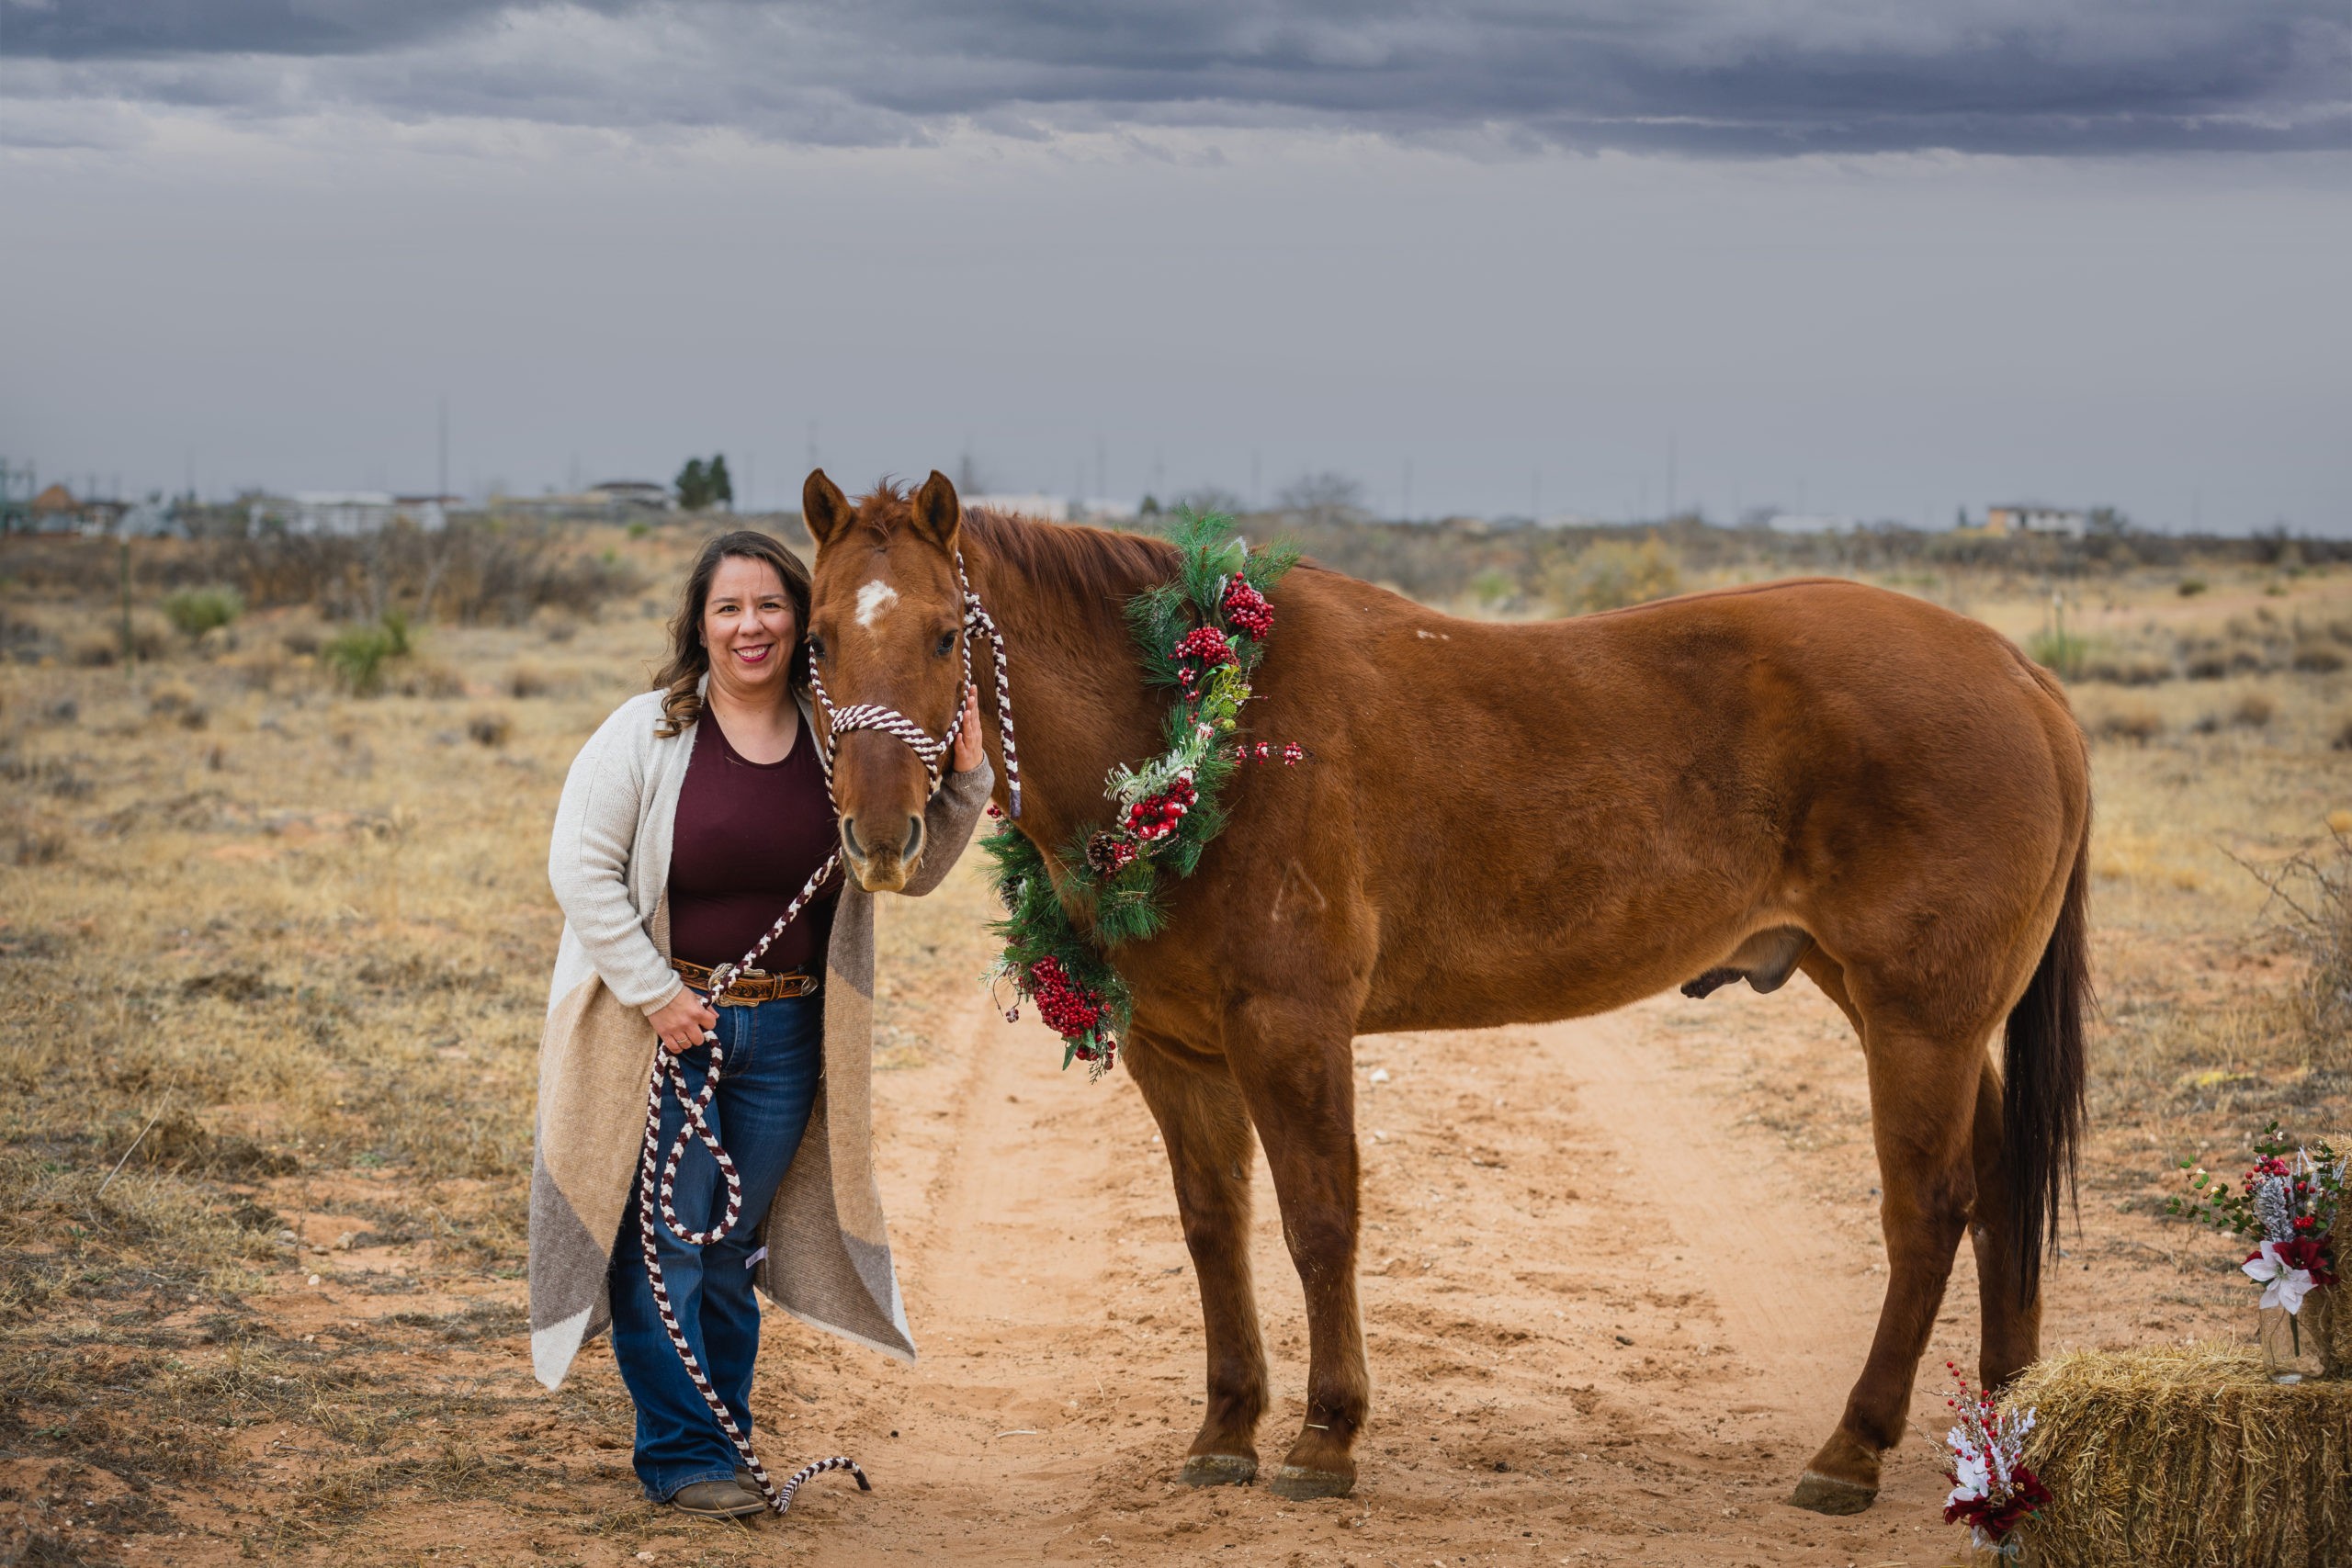 Photograph of a woman posing next to a red dun horse wearing a Christmas wreath around his neck.